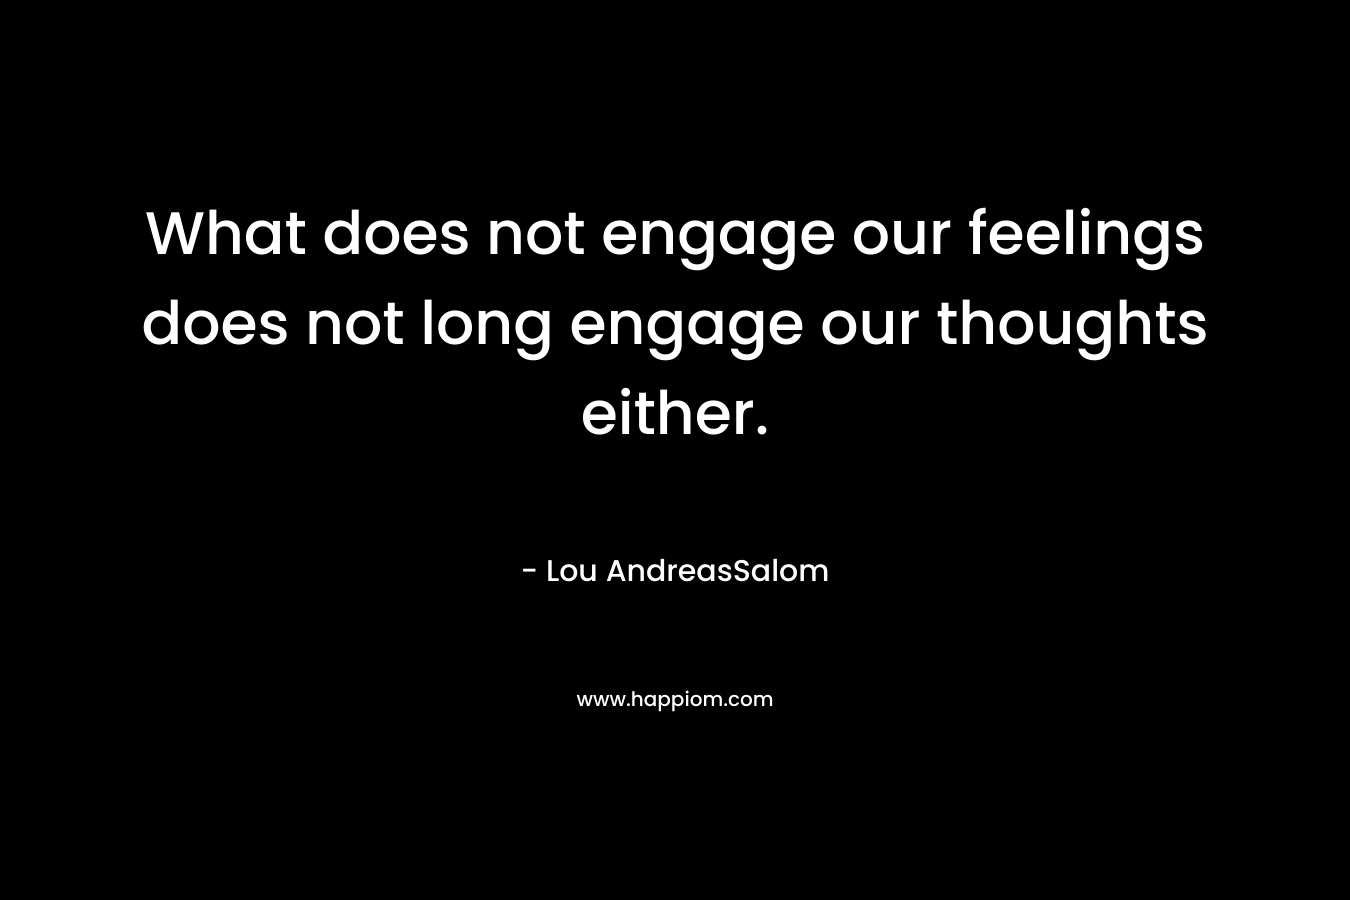 What does not engage our feelings does not long engage our thoughts either.